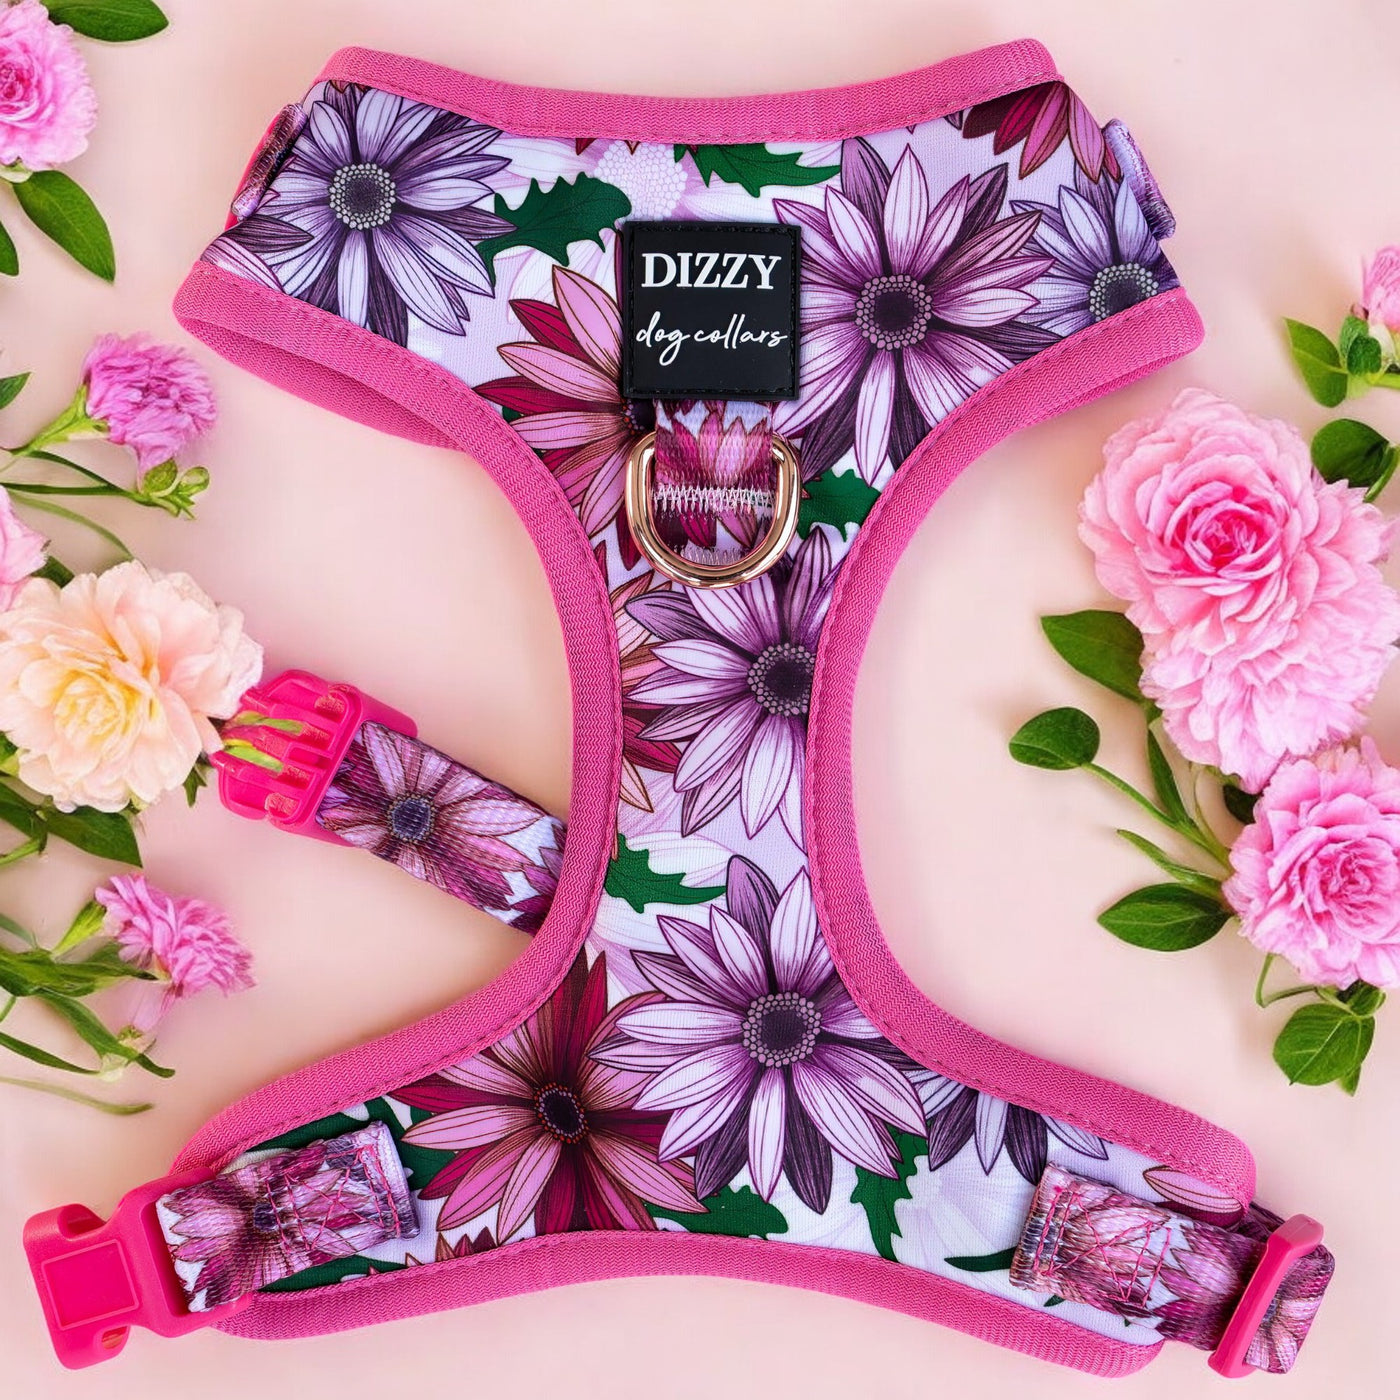 This image shows a vibrant pink dog harness adorned with a floral pattern featuring large white and purple daisies against a white background. The harness is displayed flat on a pink surface, surrounded by pink carnations and green foliage, enhancing its colorful appearance. It features a pink buckle, adjustable straps, and a branded label that reads "Dizzy Dog Collars" in the center. The design is both functional and stylish, ideal for fashionable pets.